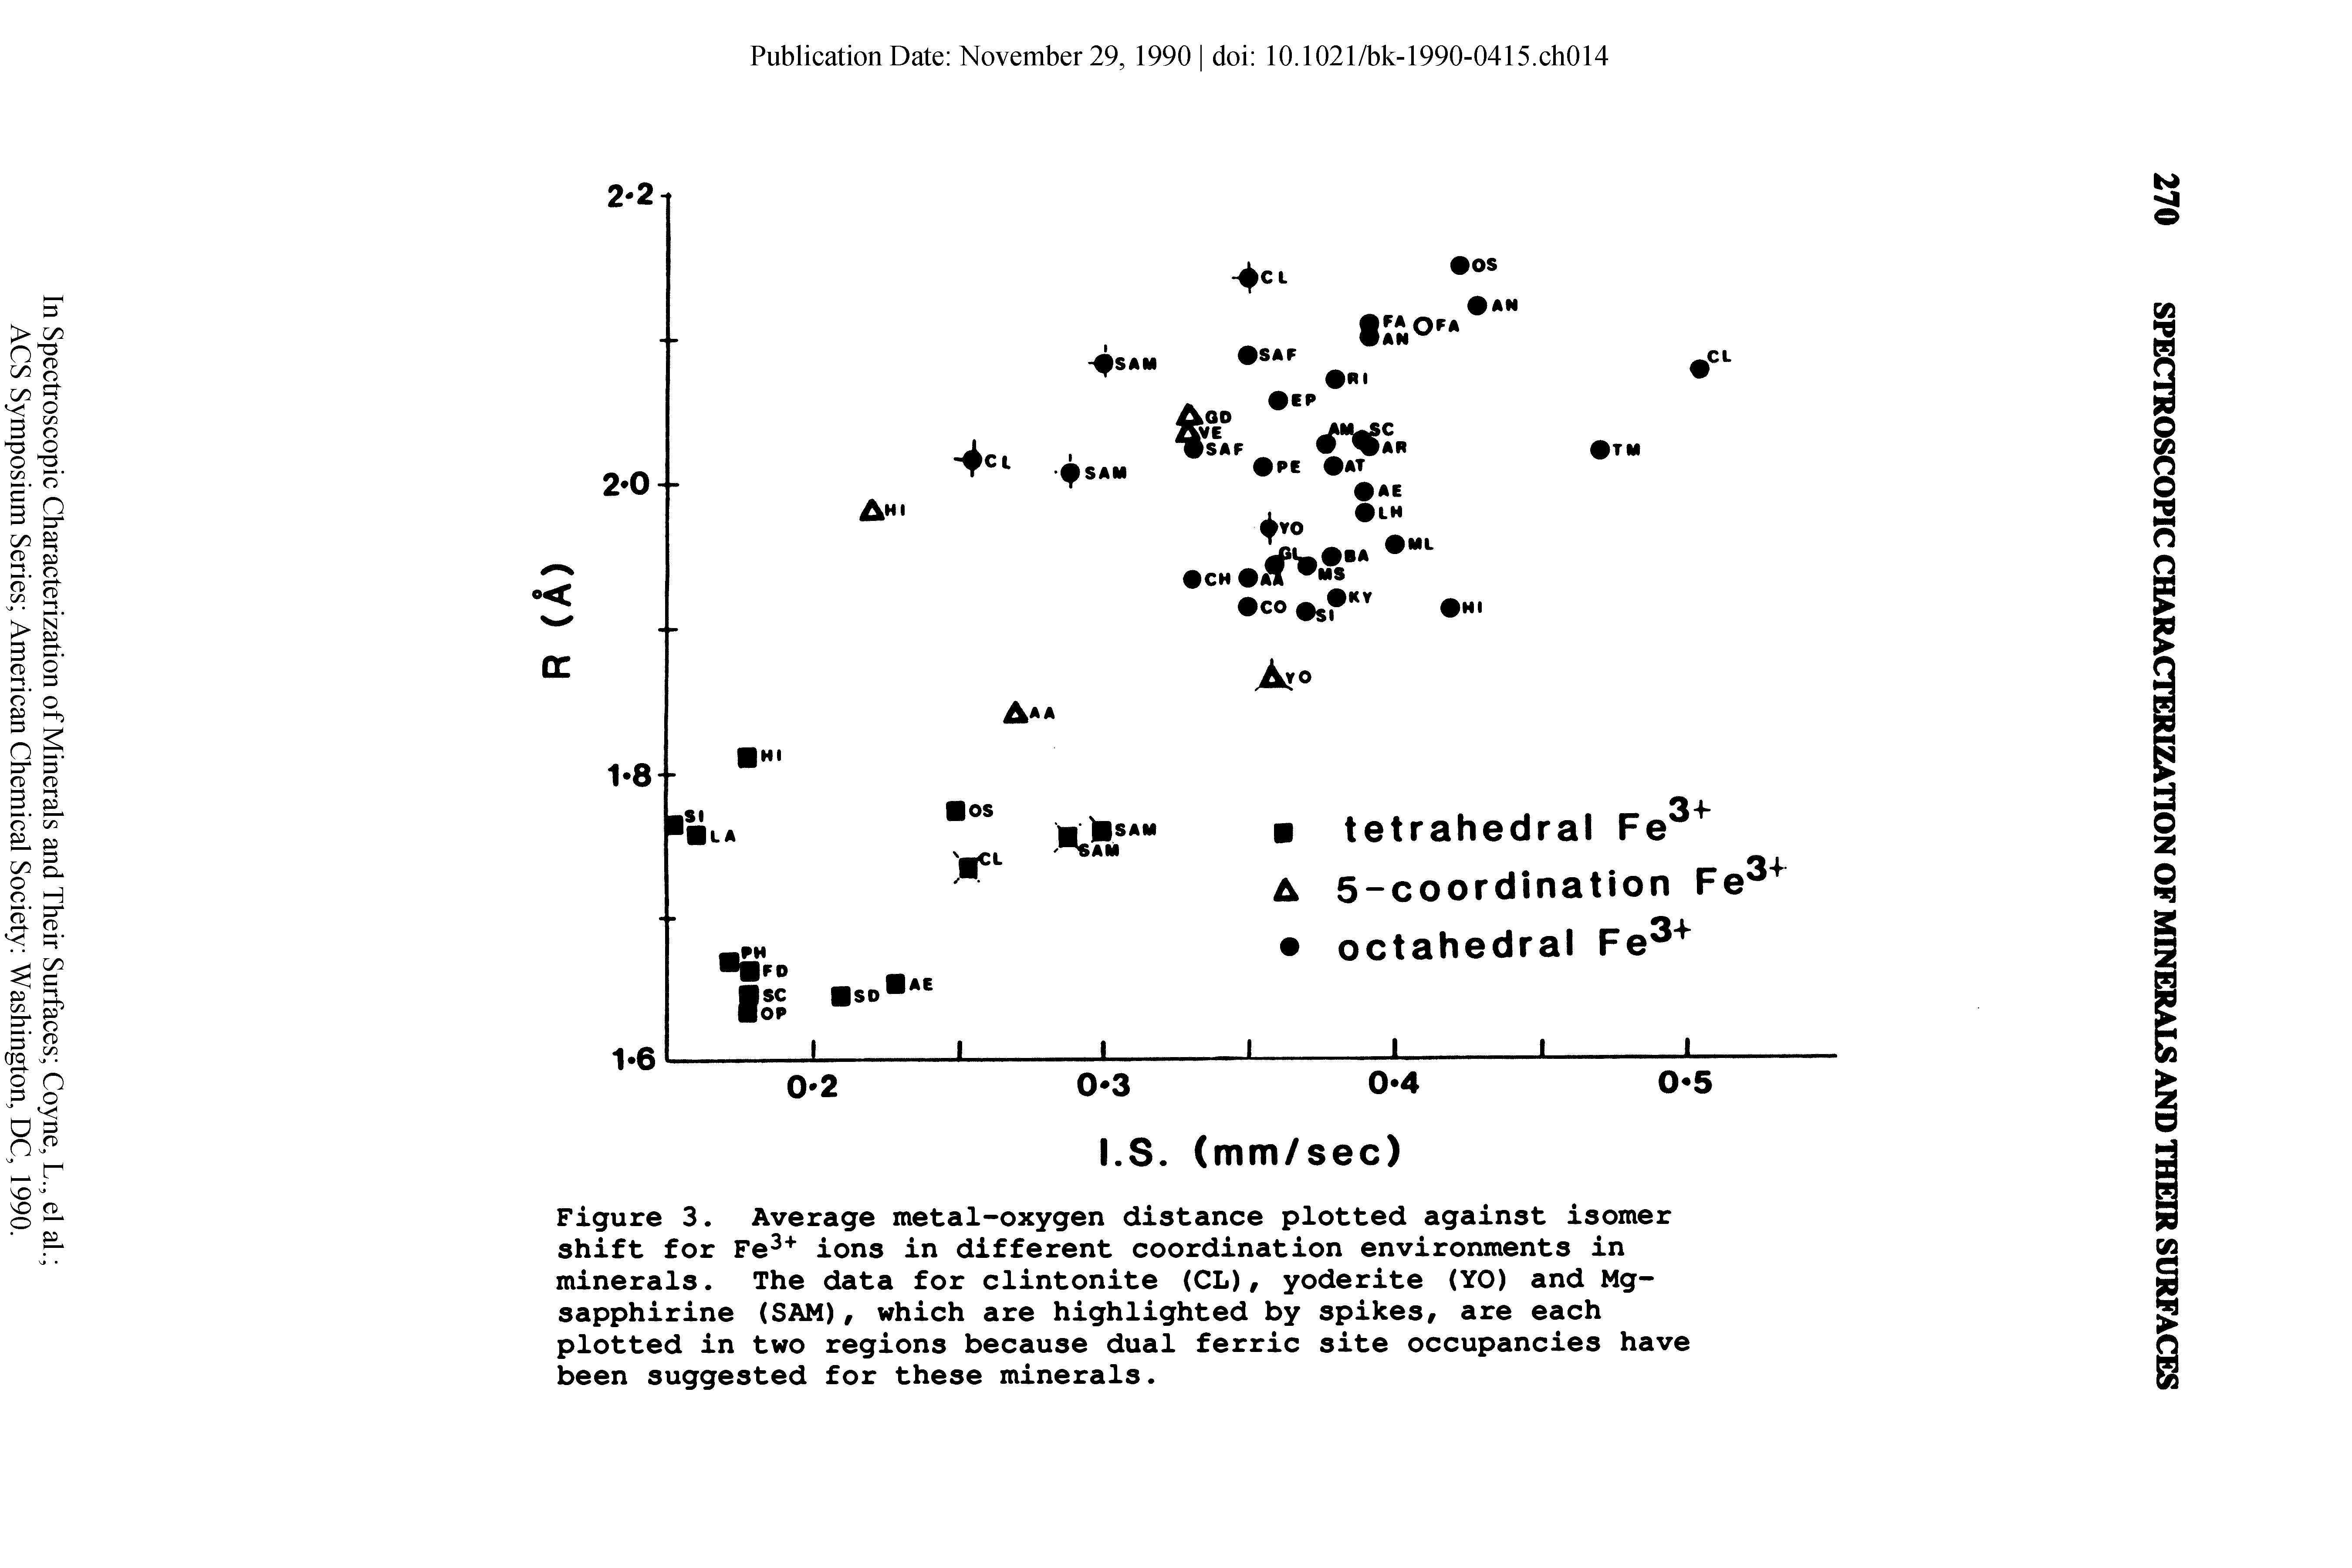 Figure 3. Average metal-oxygen distance plotted against isomer shift for Fe3+ ions in different coordination environments in minerals. The data for clintonite (CL), yoderite (YO) and Mg-sapphirine (SAM), which are highlighted by spikes, are each plotted in two regions because dual ferric site occupancies have been suggested for these minerals.